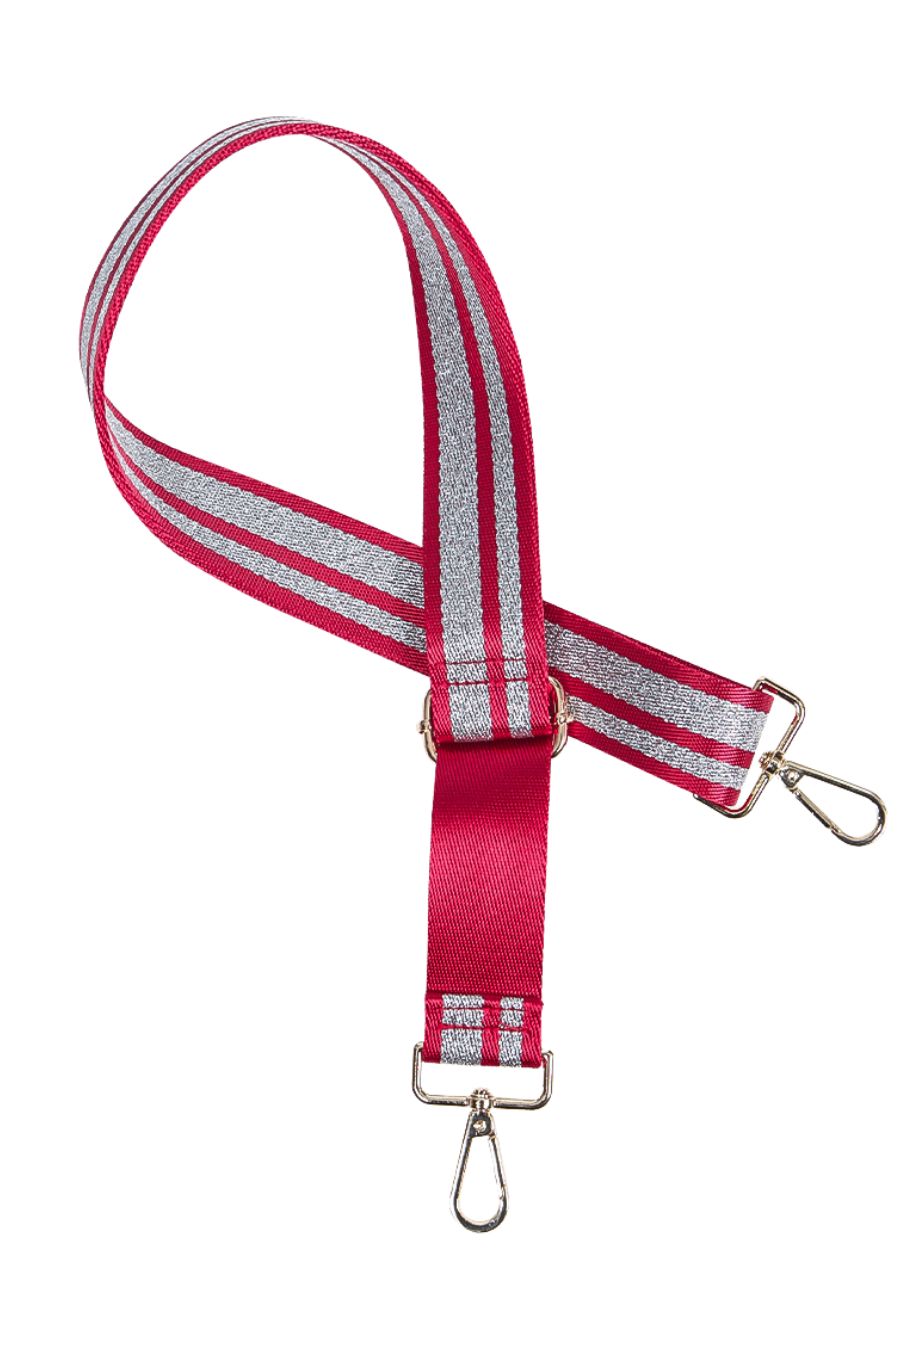 silver glitter and red adjustable replacement strap